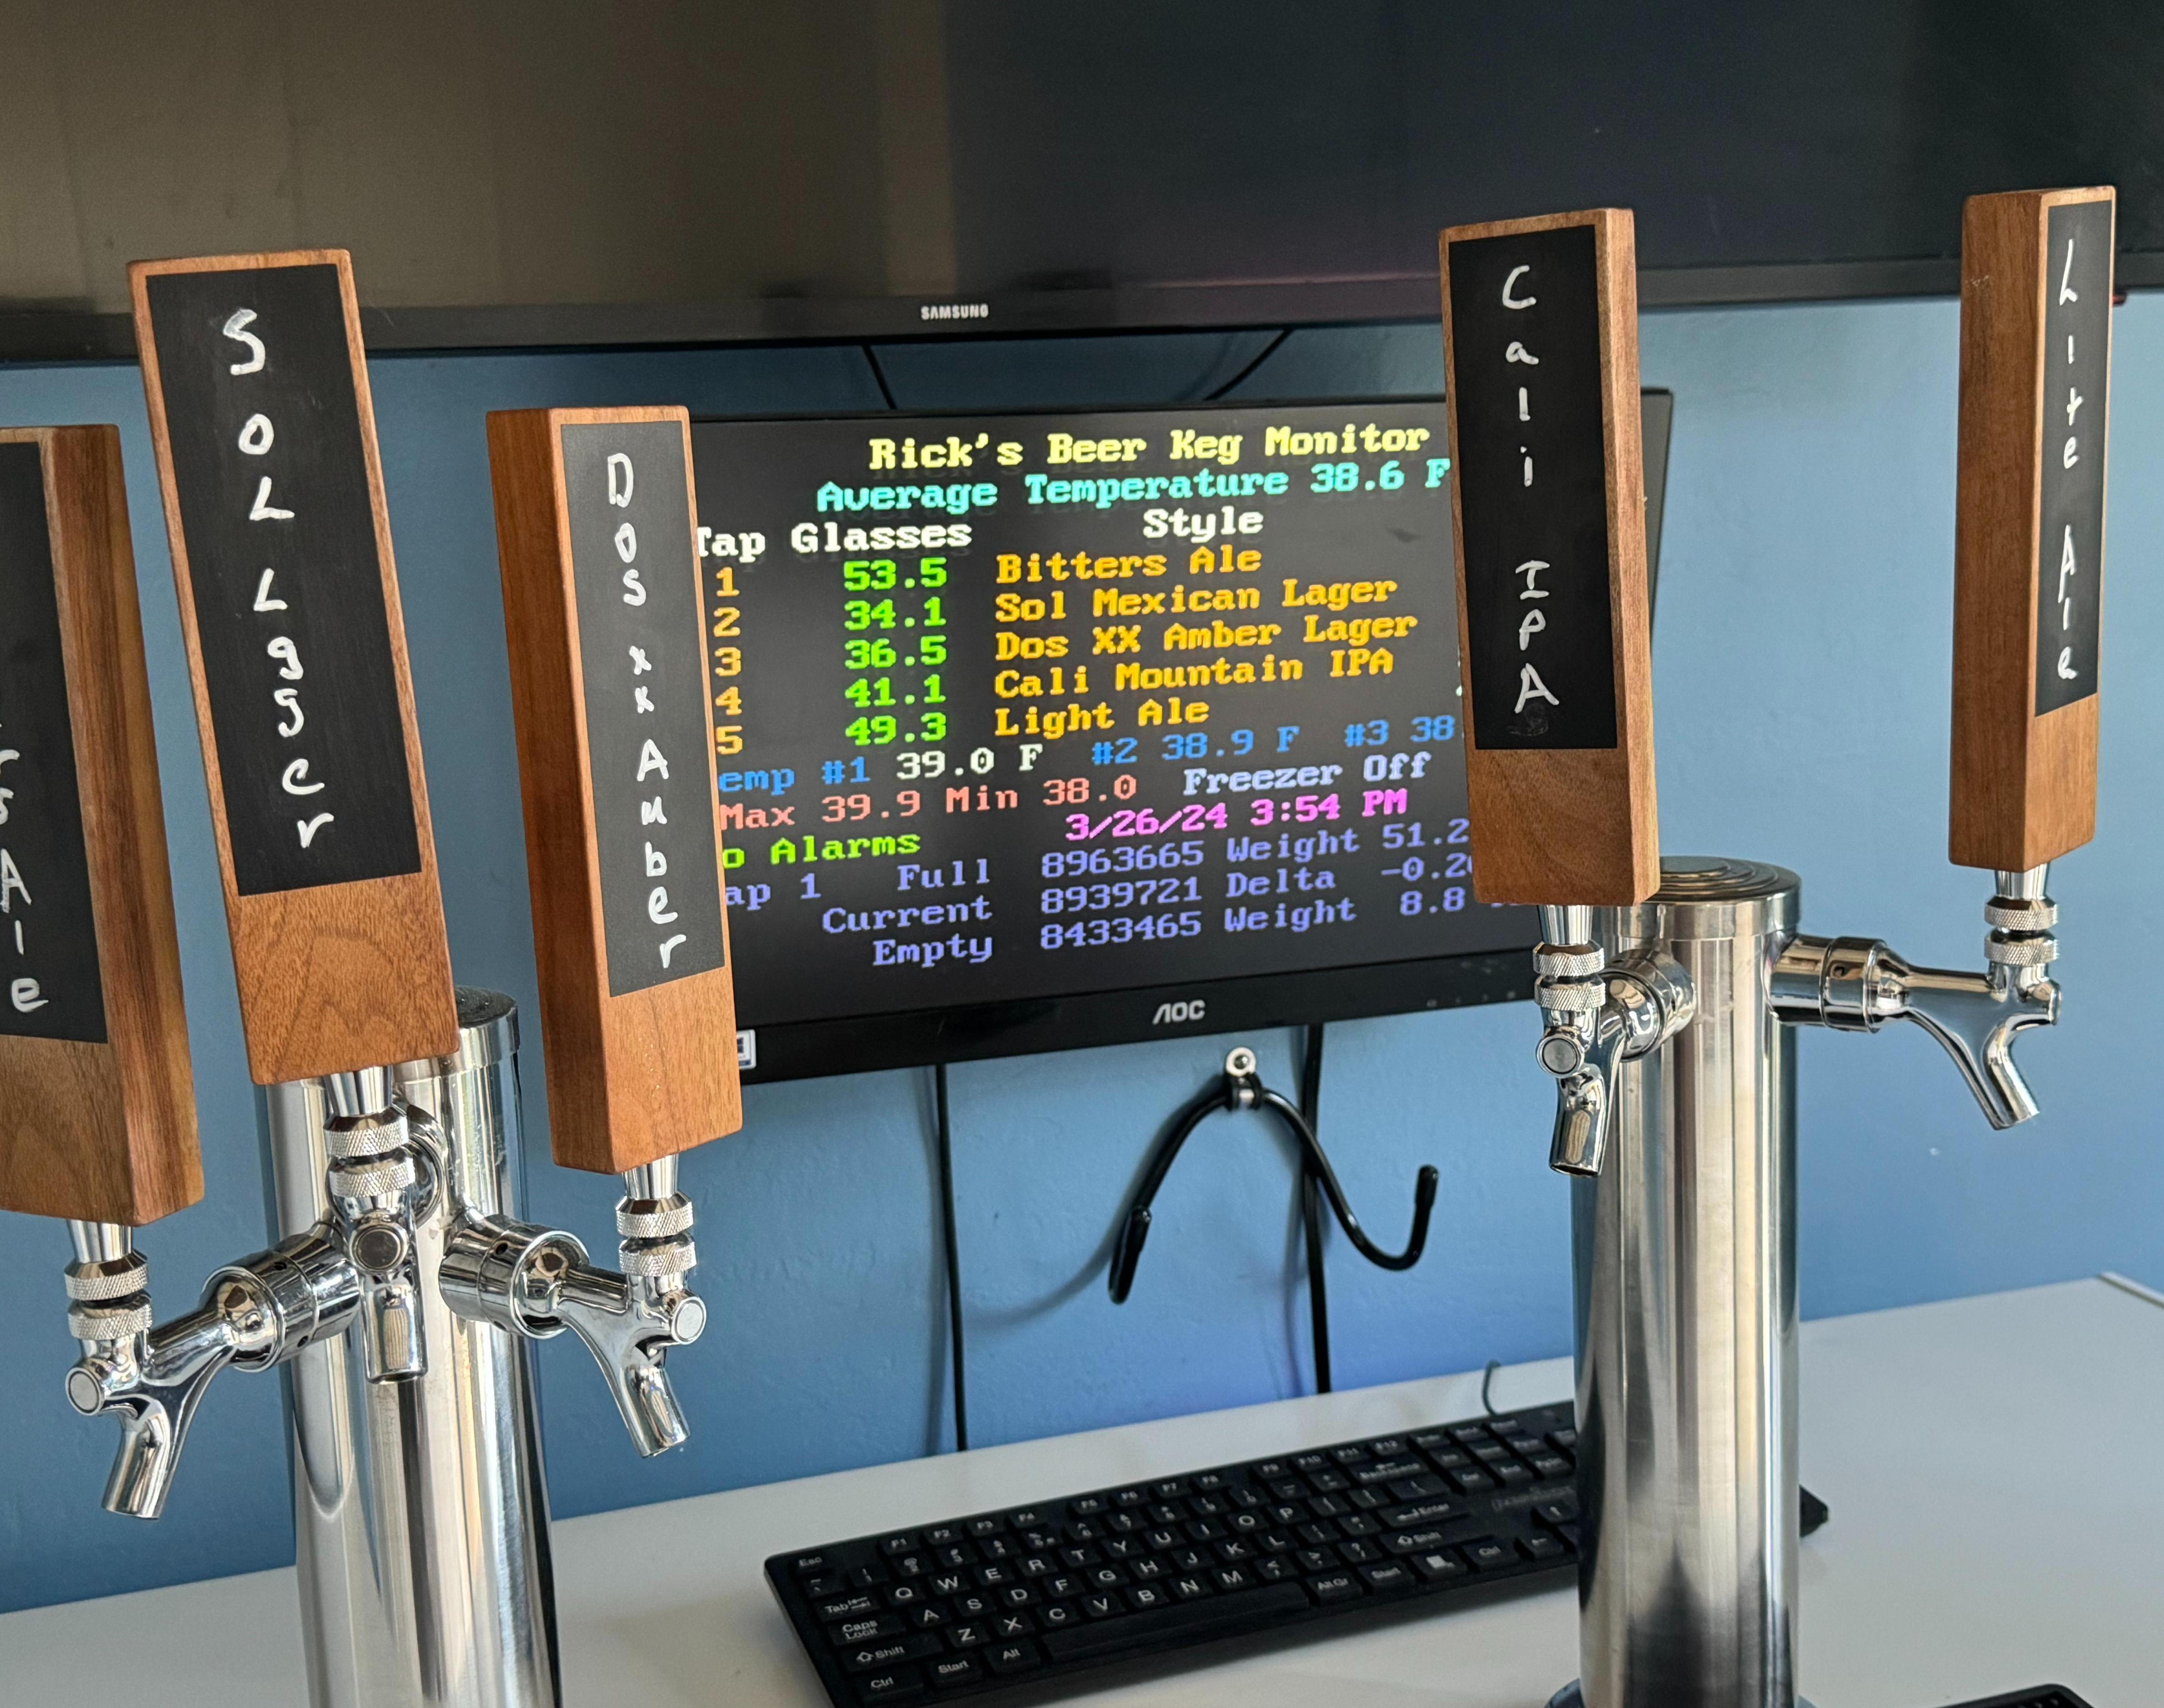 Low Cost Beer Monitoring System